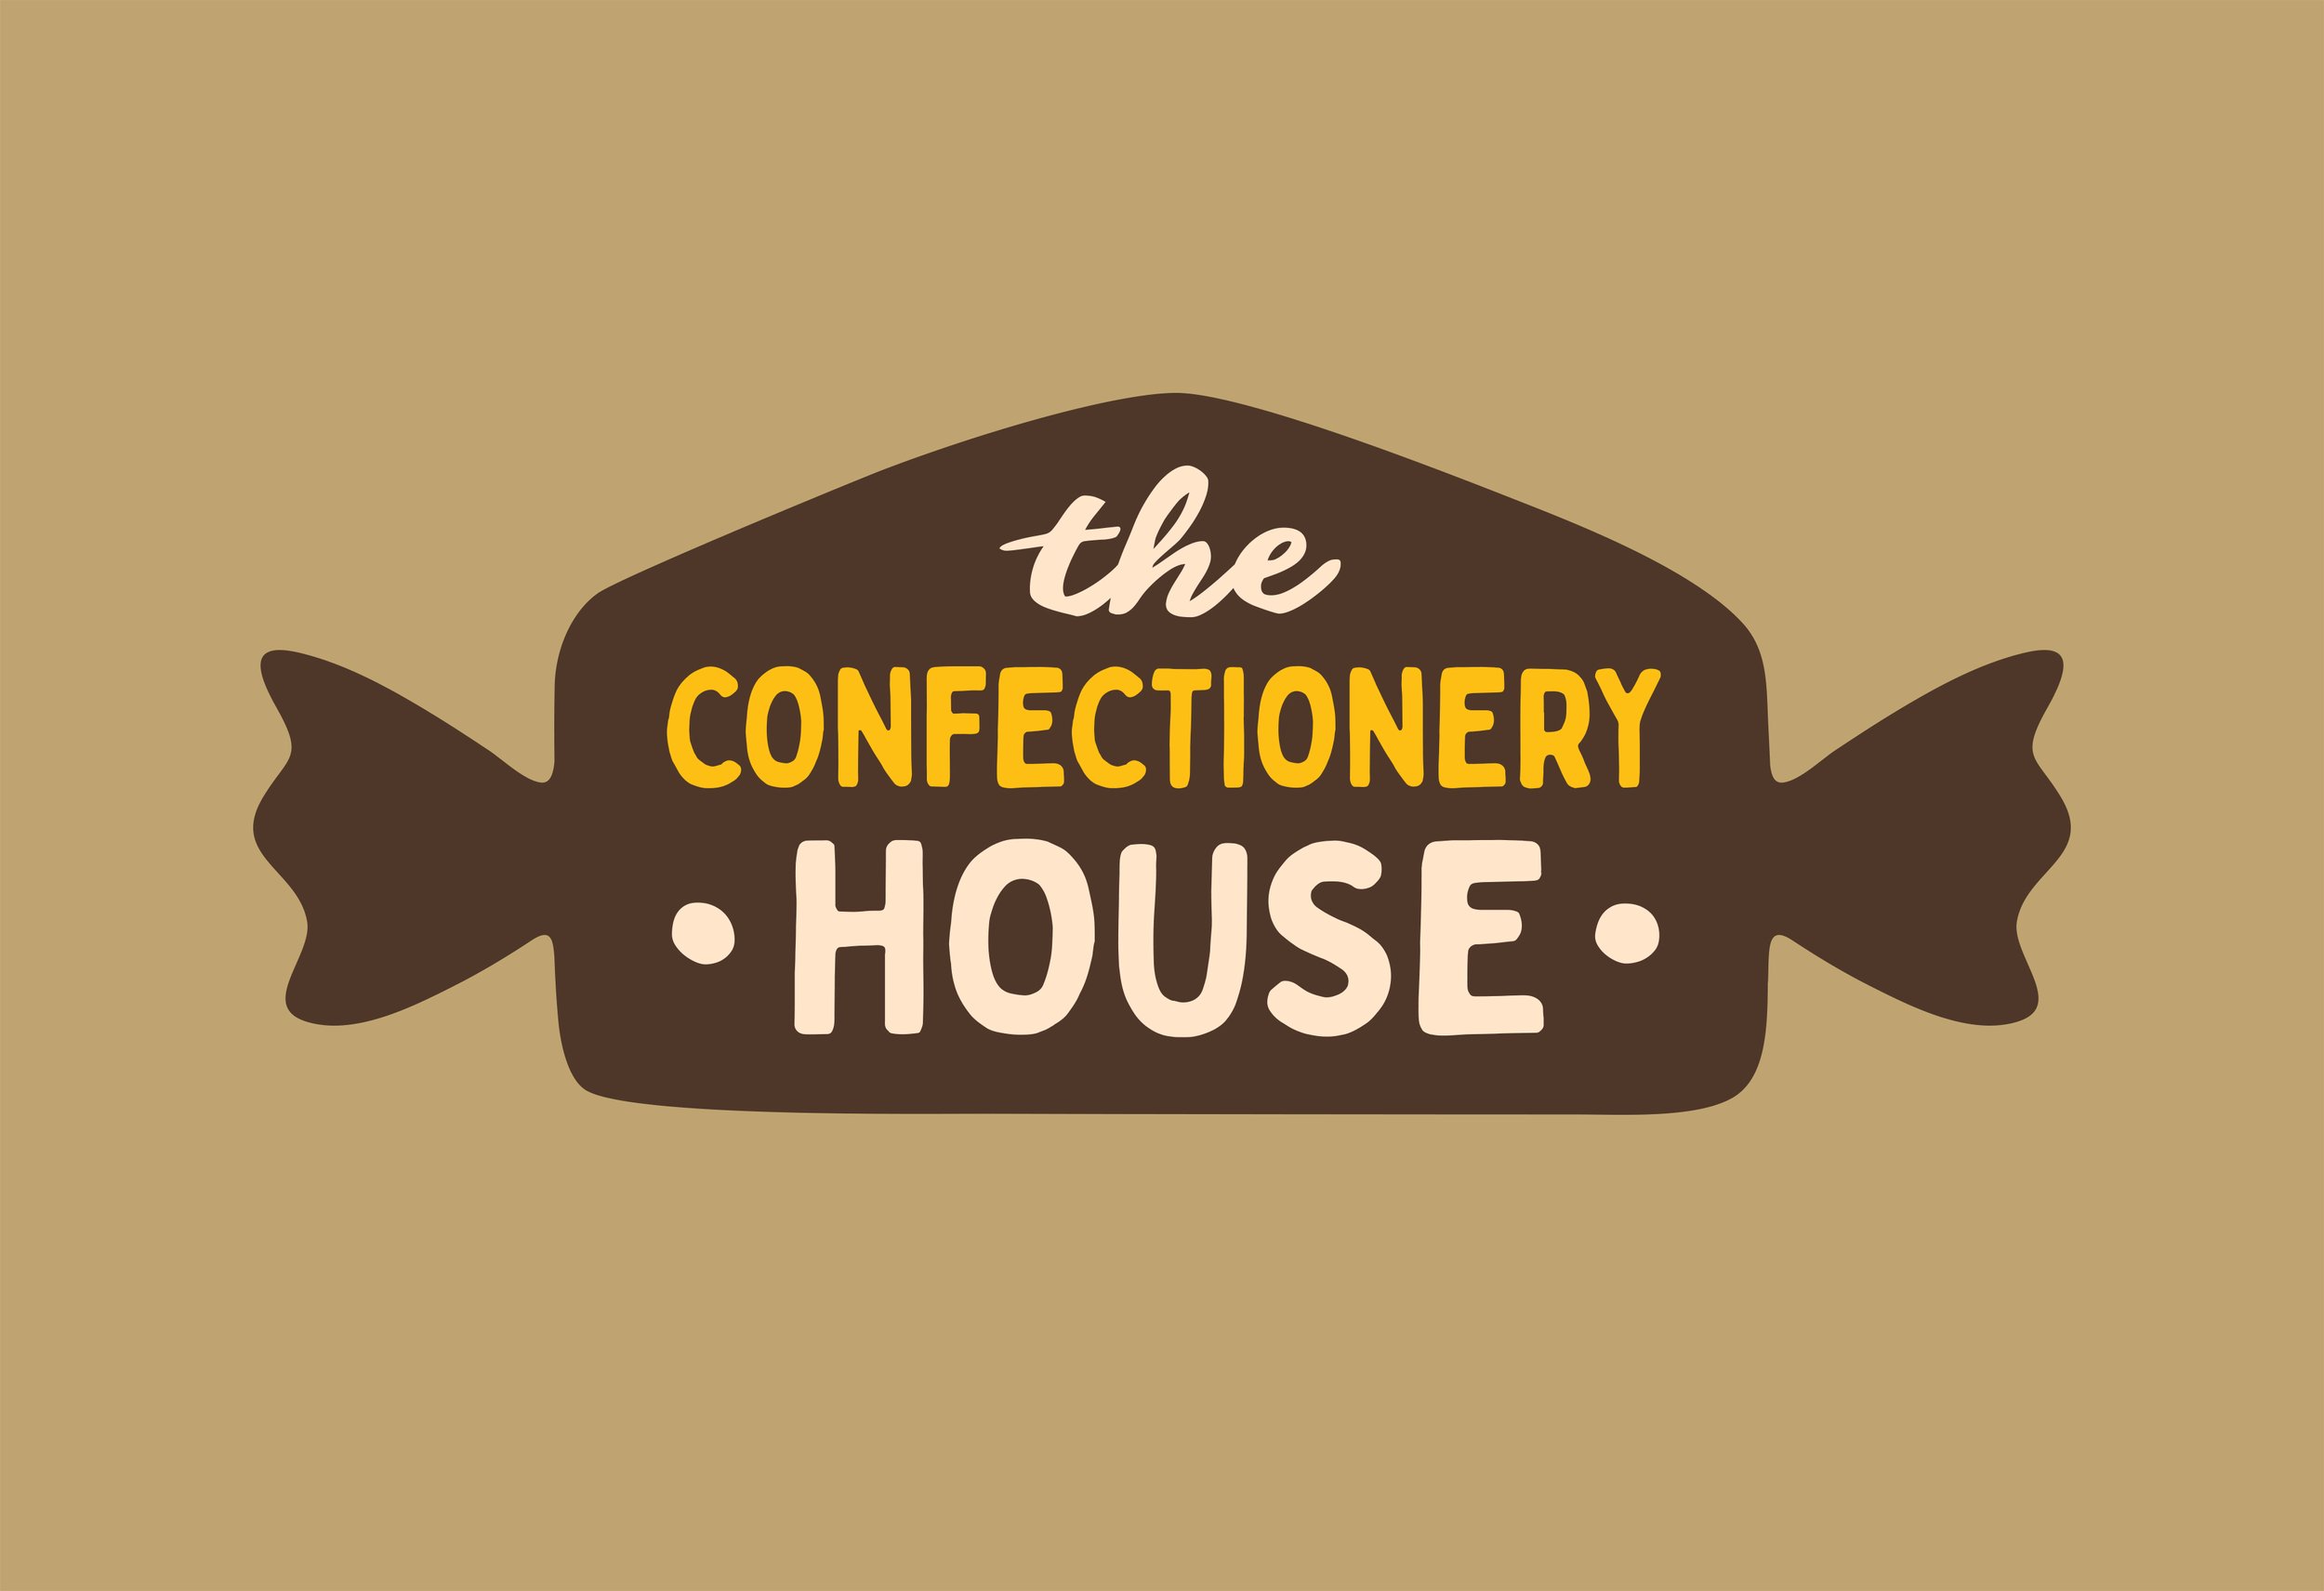 The Confectionery House Logo.jpg